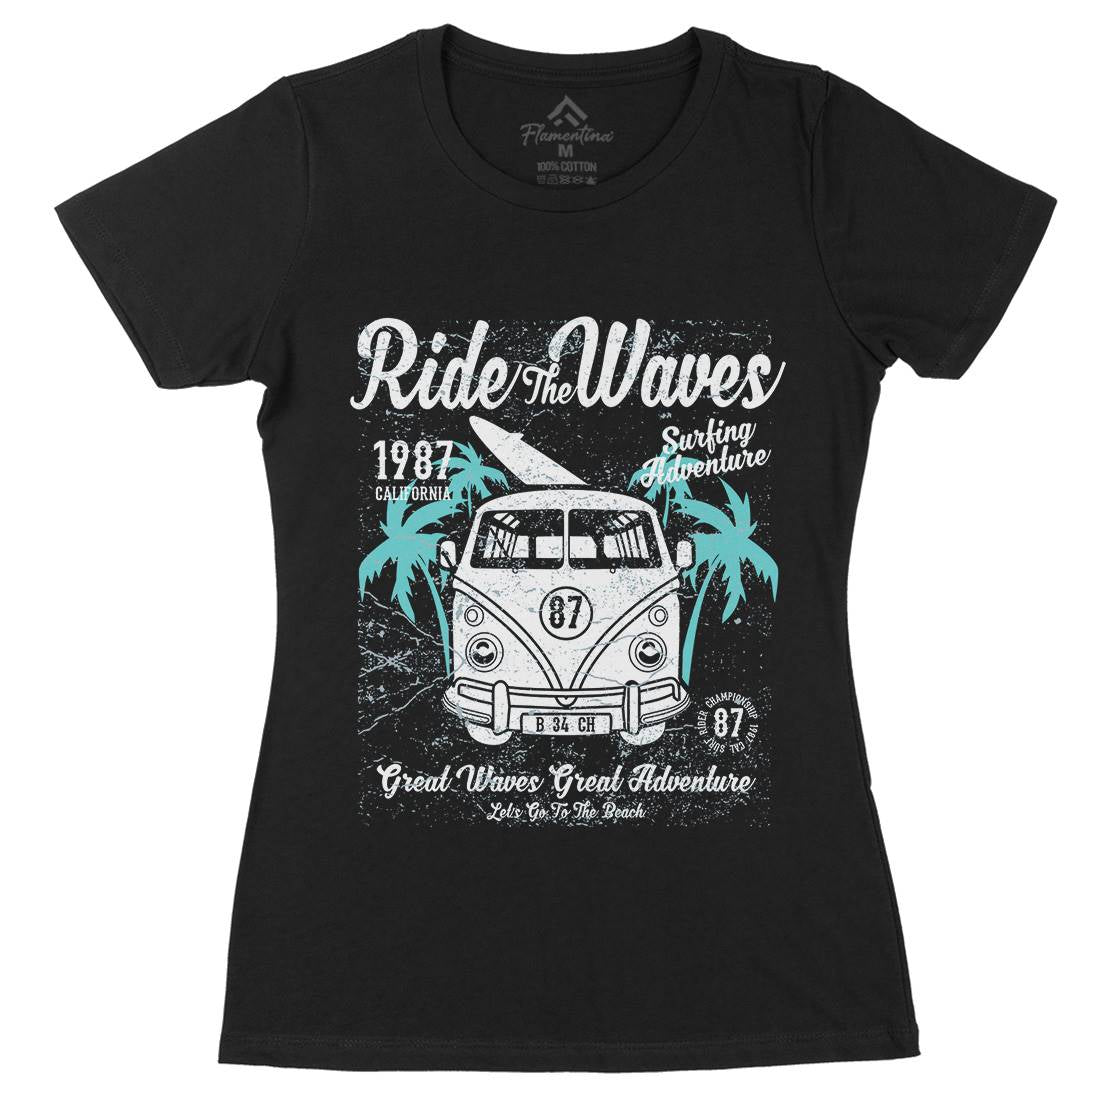 Ride The Waves Womens Organic Crew Neck T-Shirt Surf A119